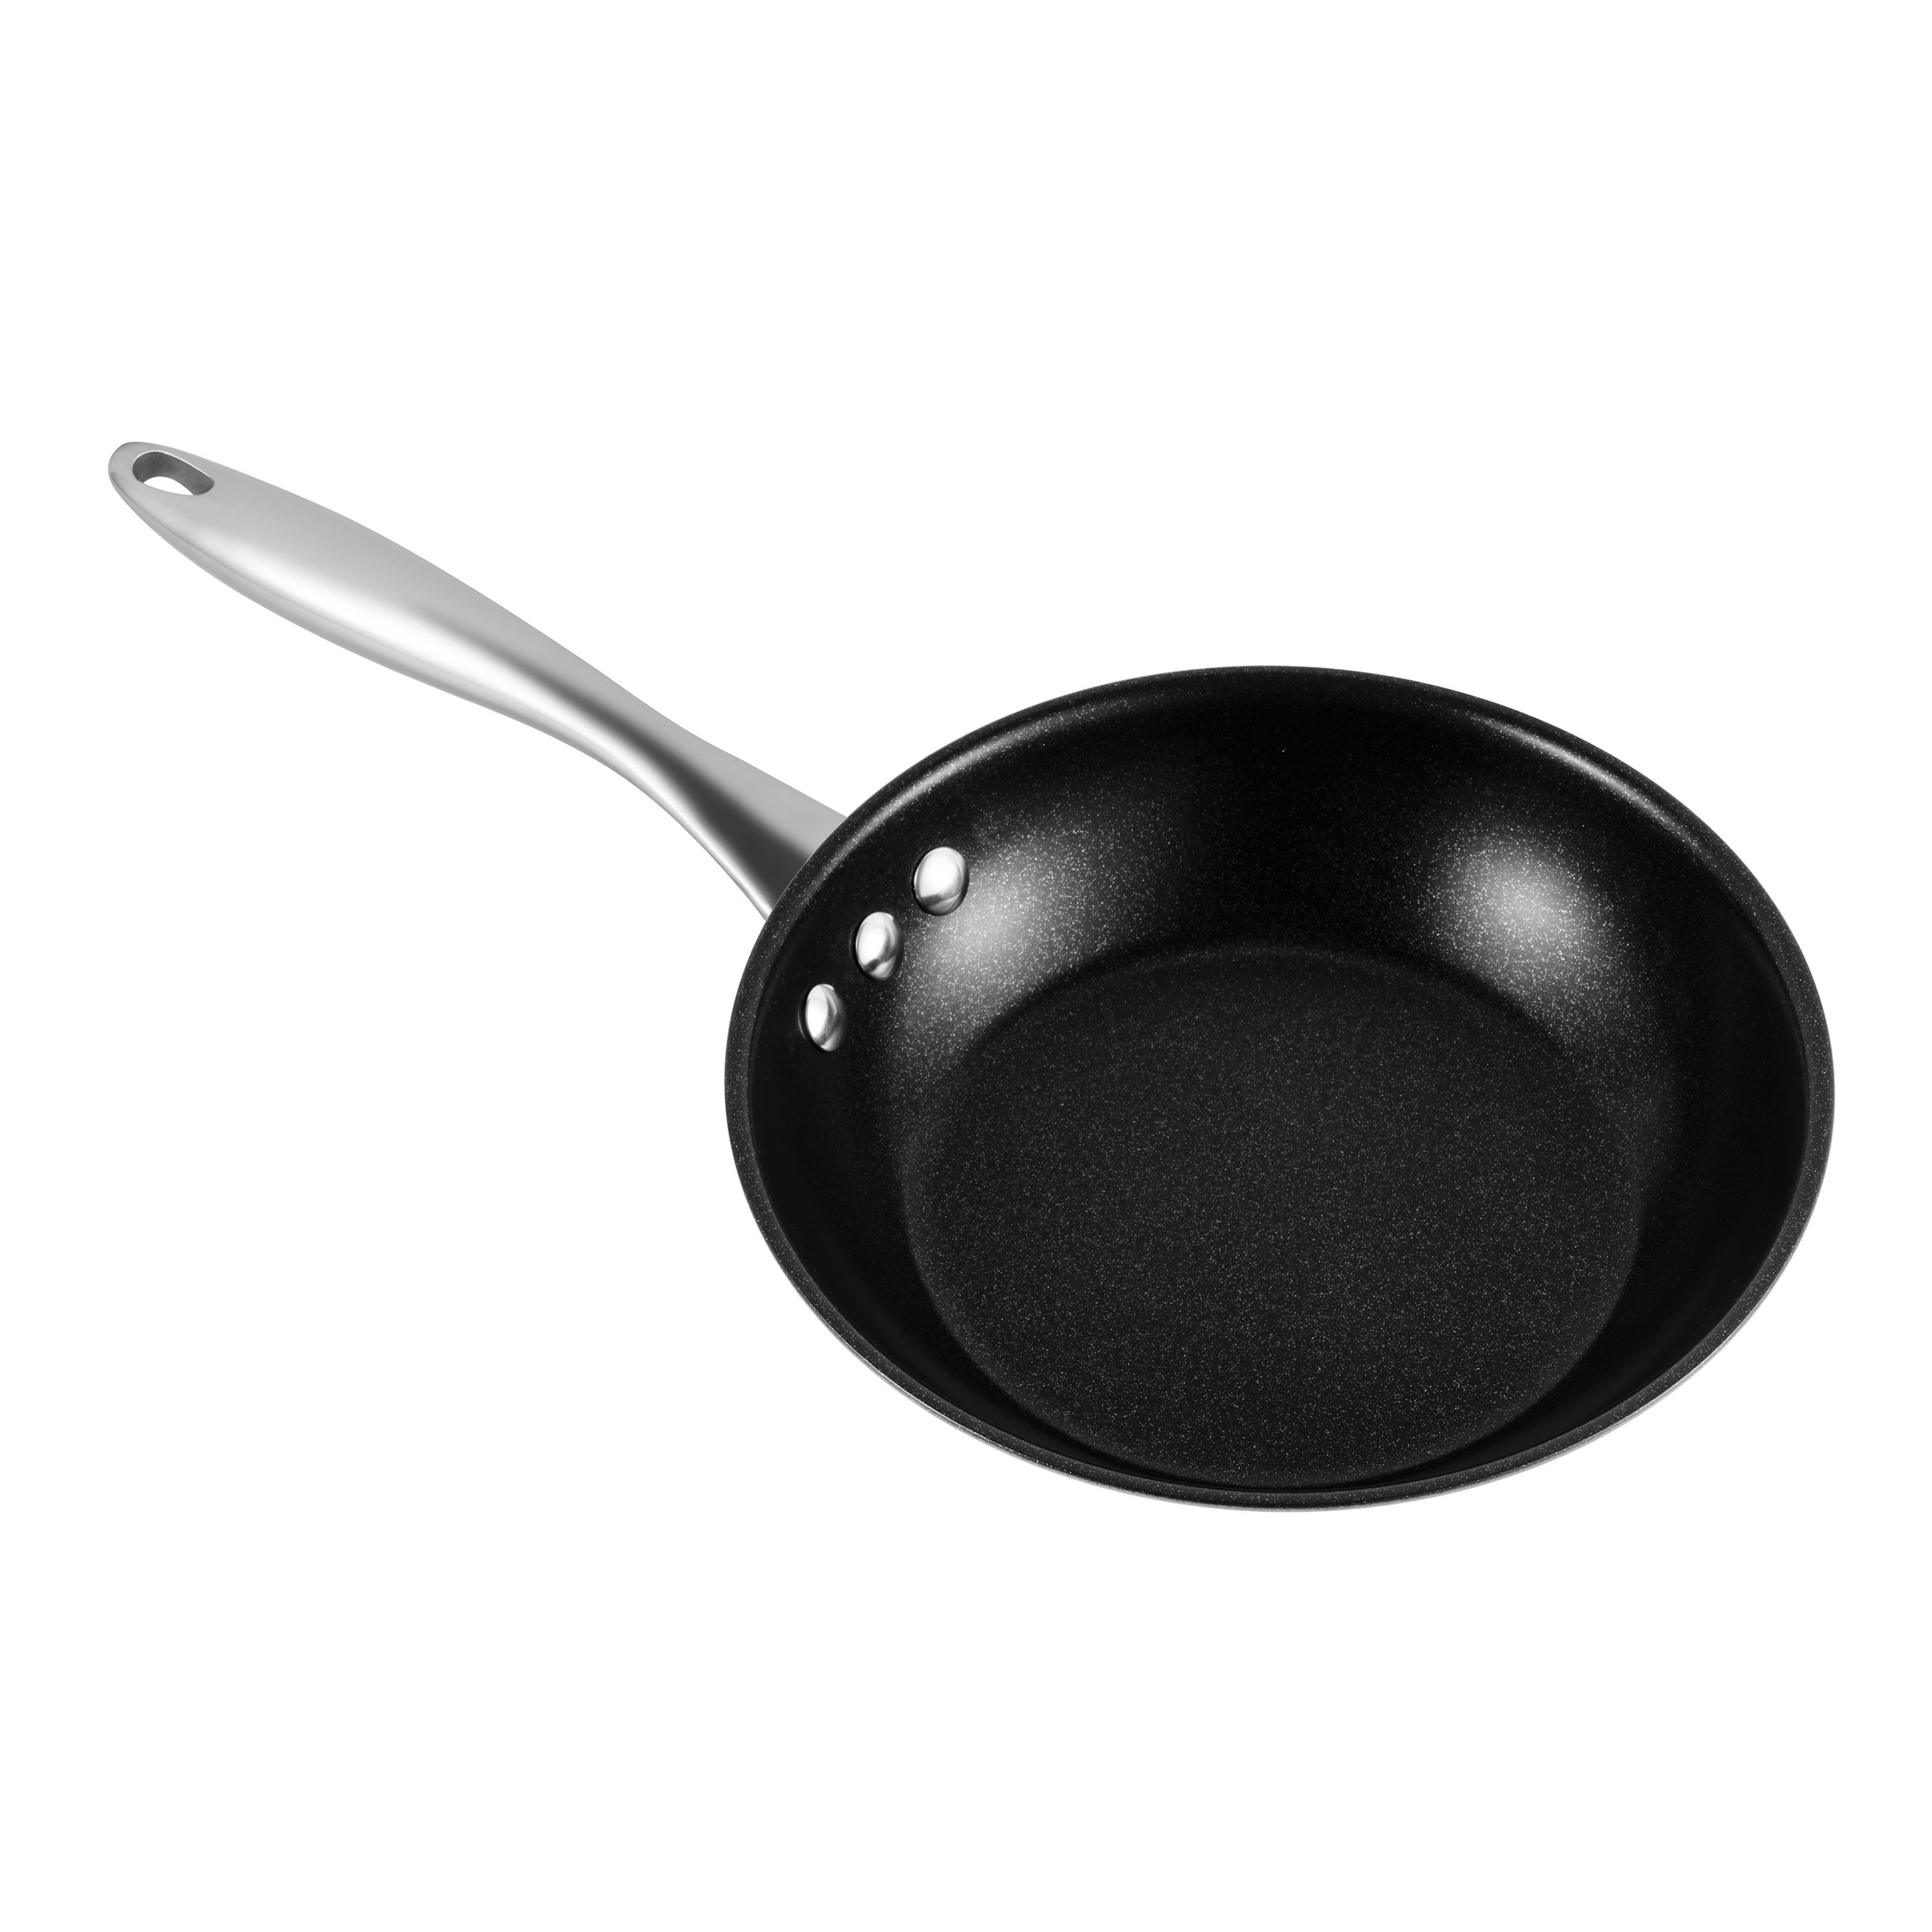 Stainless-Steel Pan is NON-STICK, The Water Test